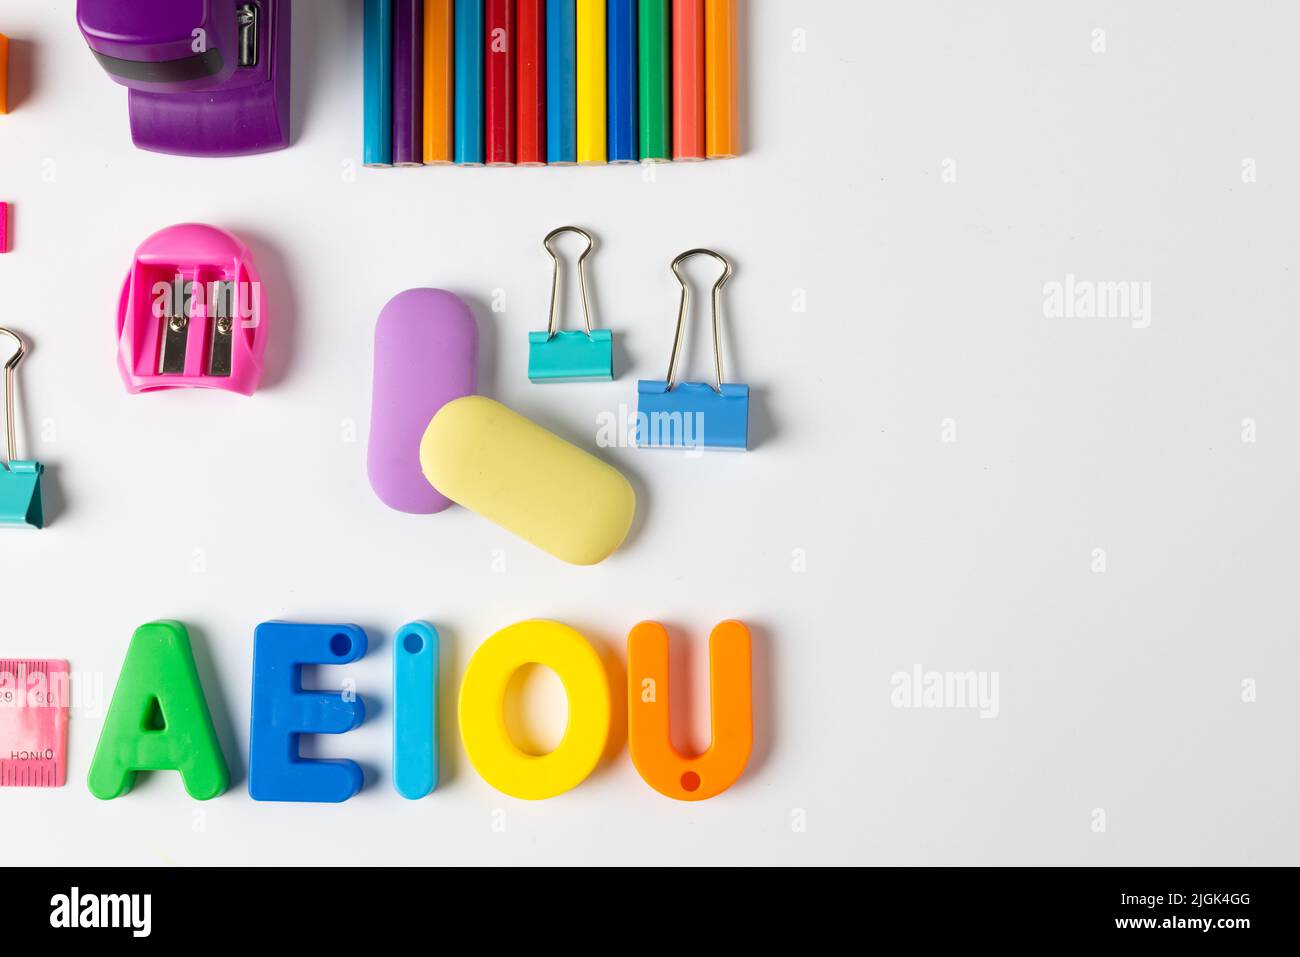 Composition of colorful school equipment with letters and clips on white surface Stock Photo